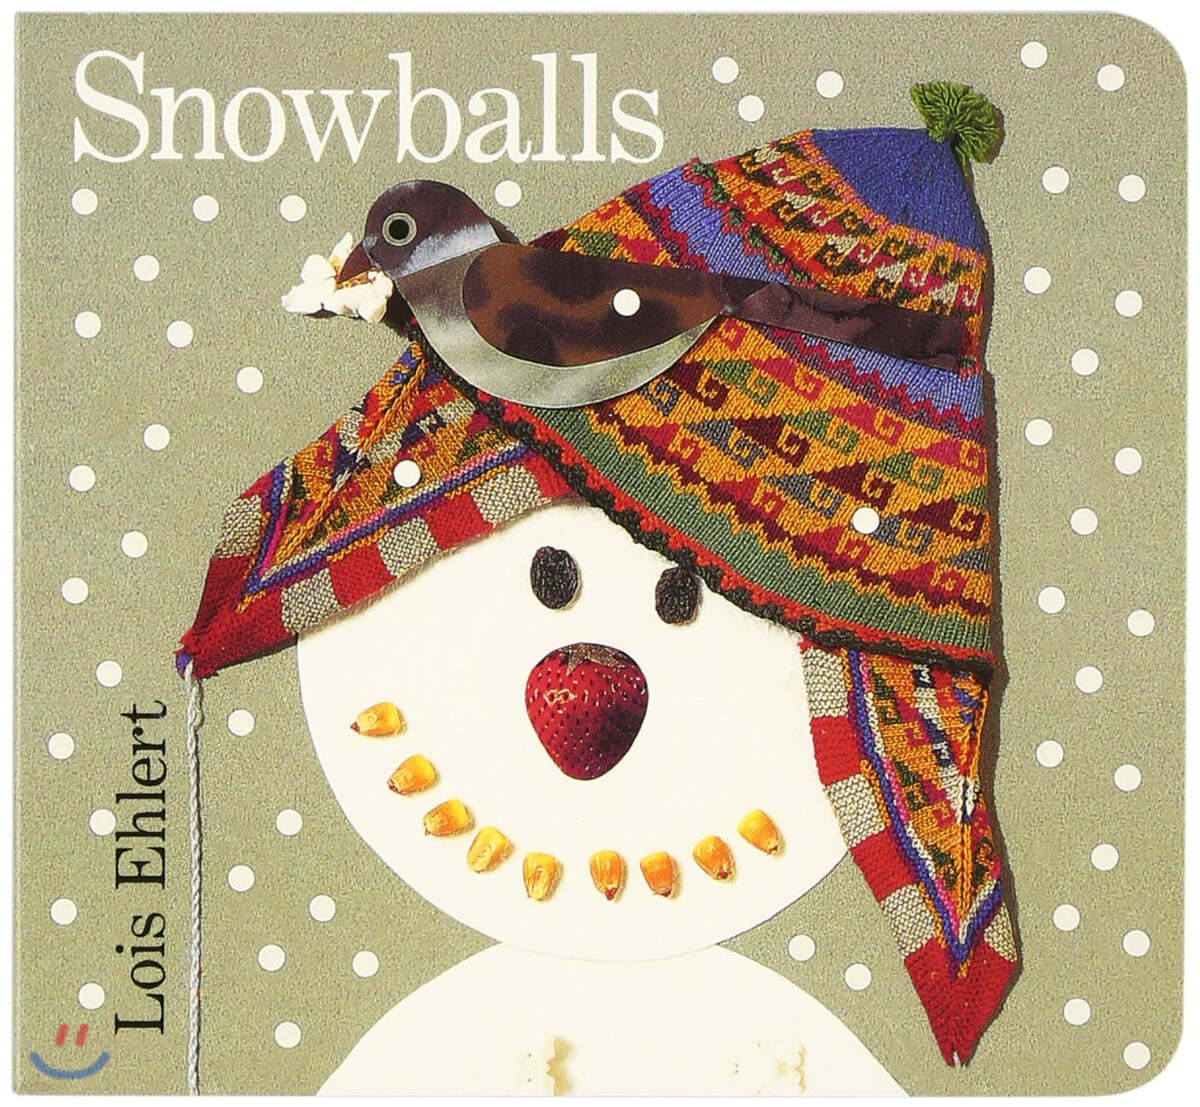 Snowballs Board Book: A Winter and Holiday Book for Kids